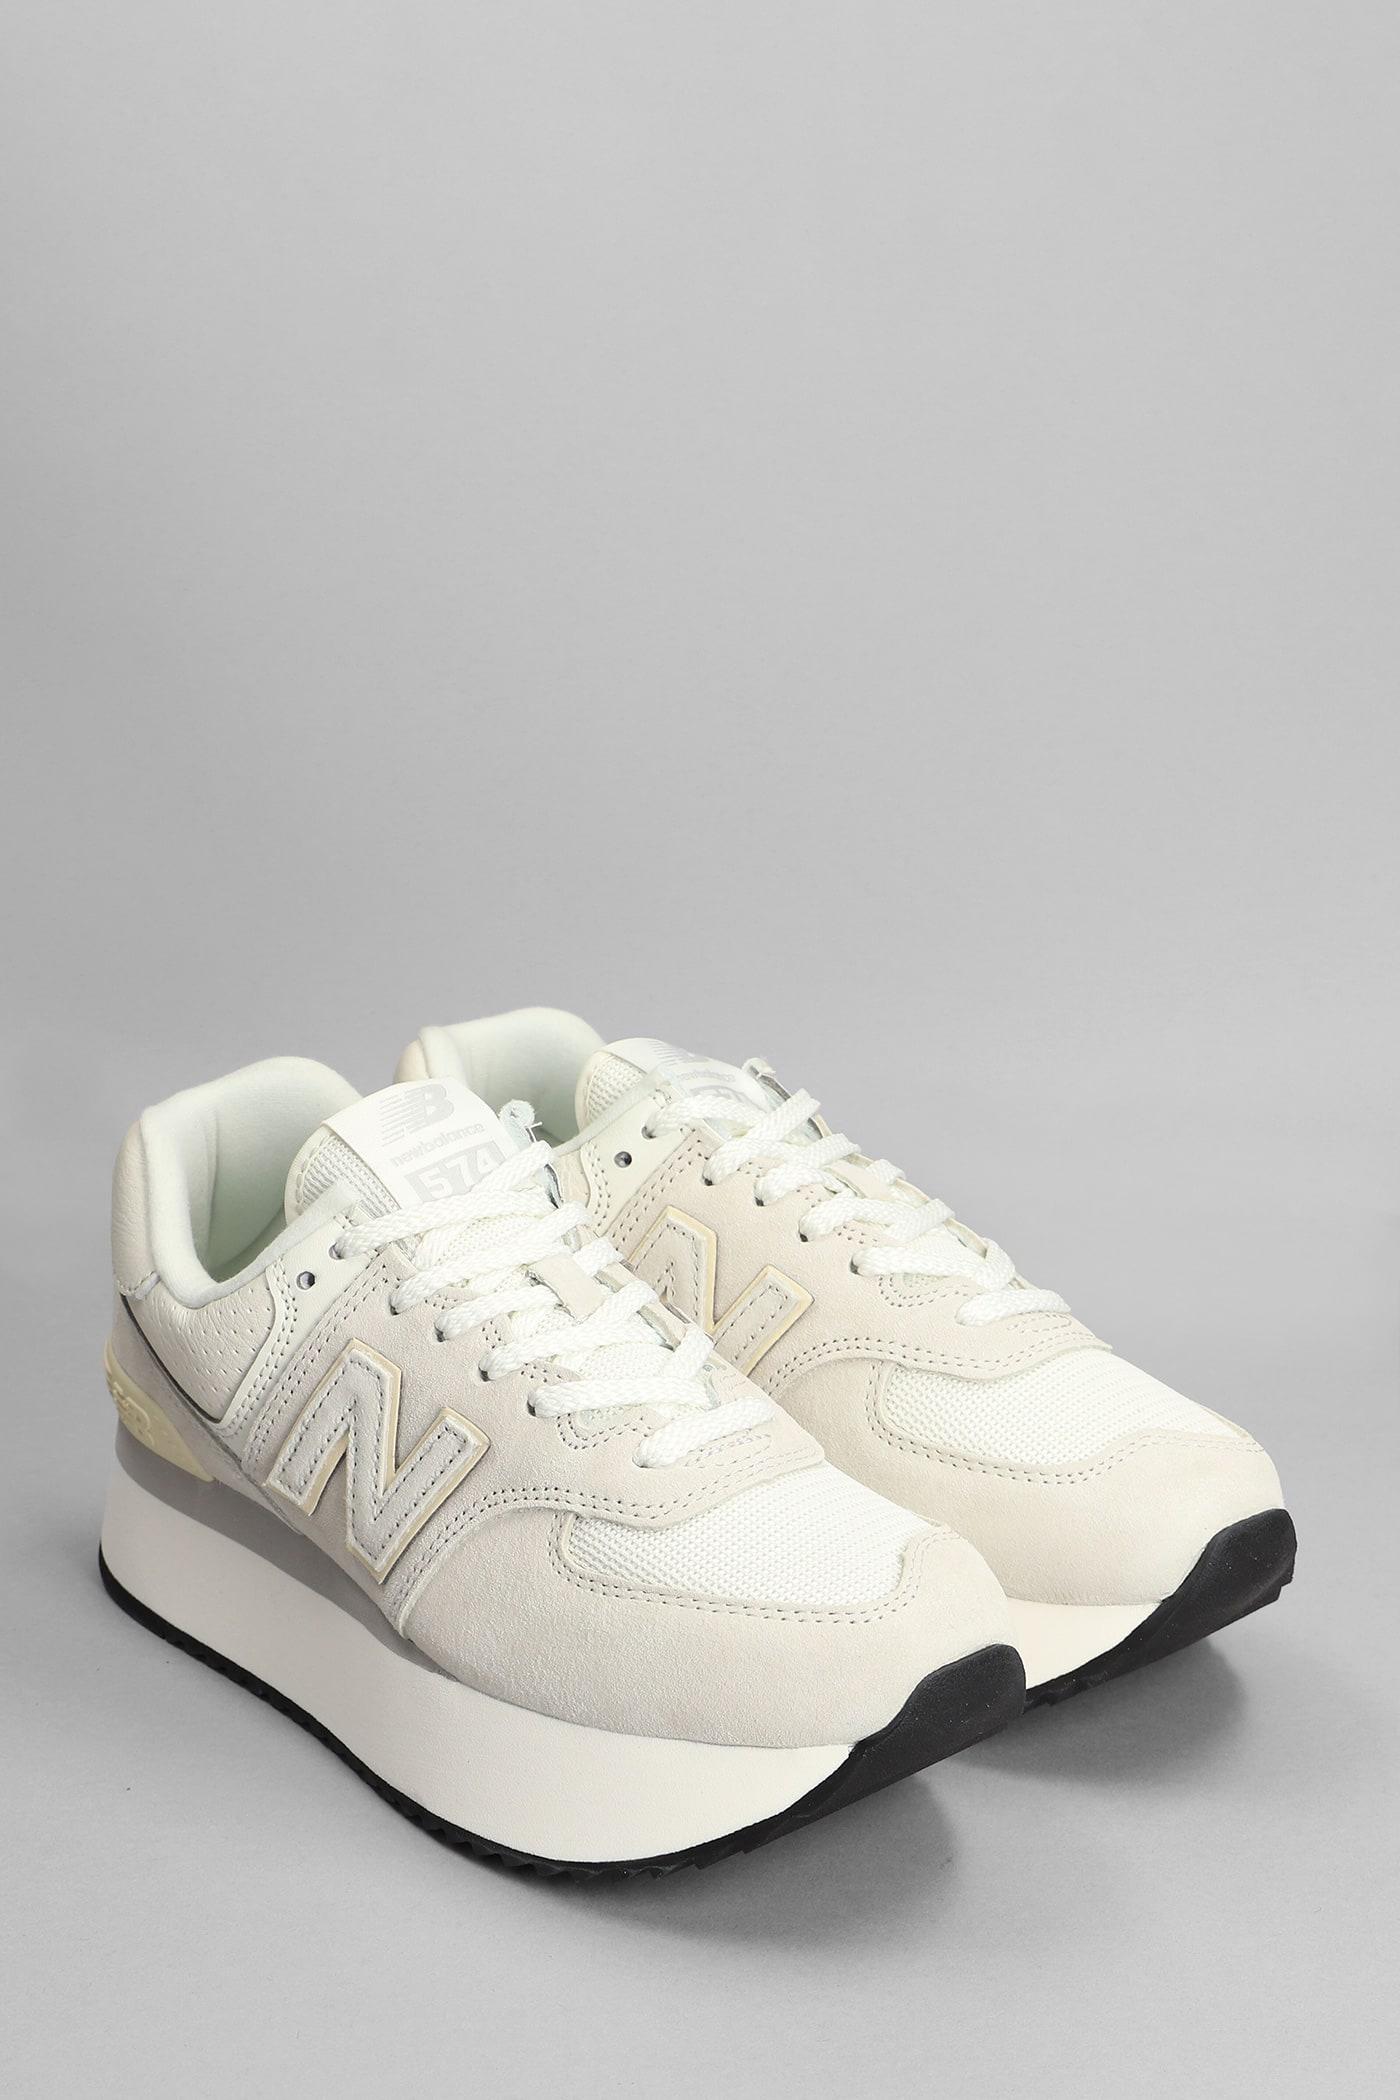 New Balance 574 Sneakers In Beige Suede And Fabric in White | Lyst